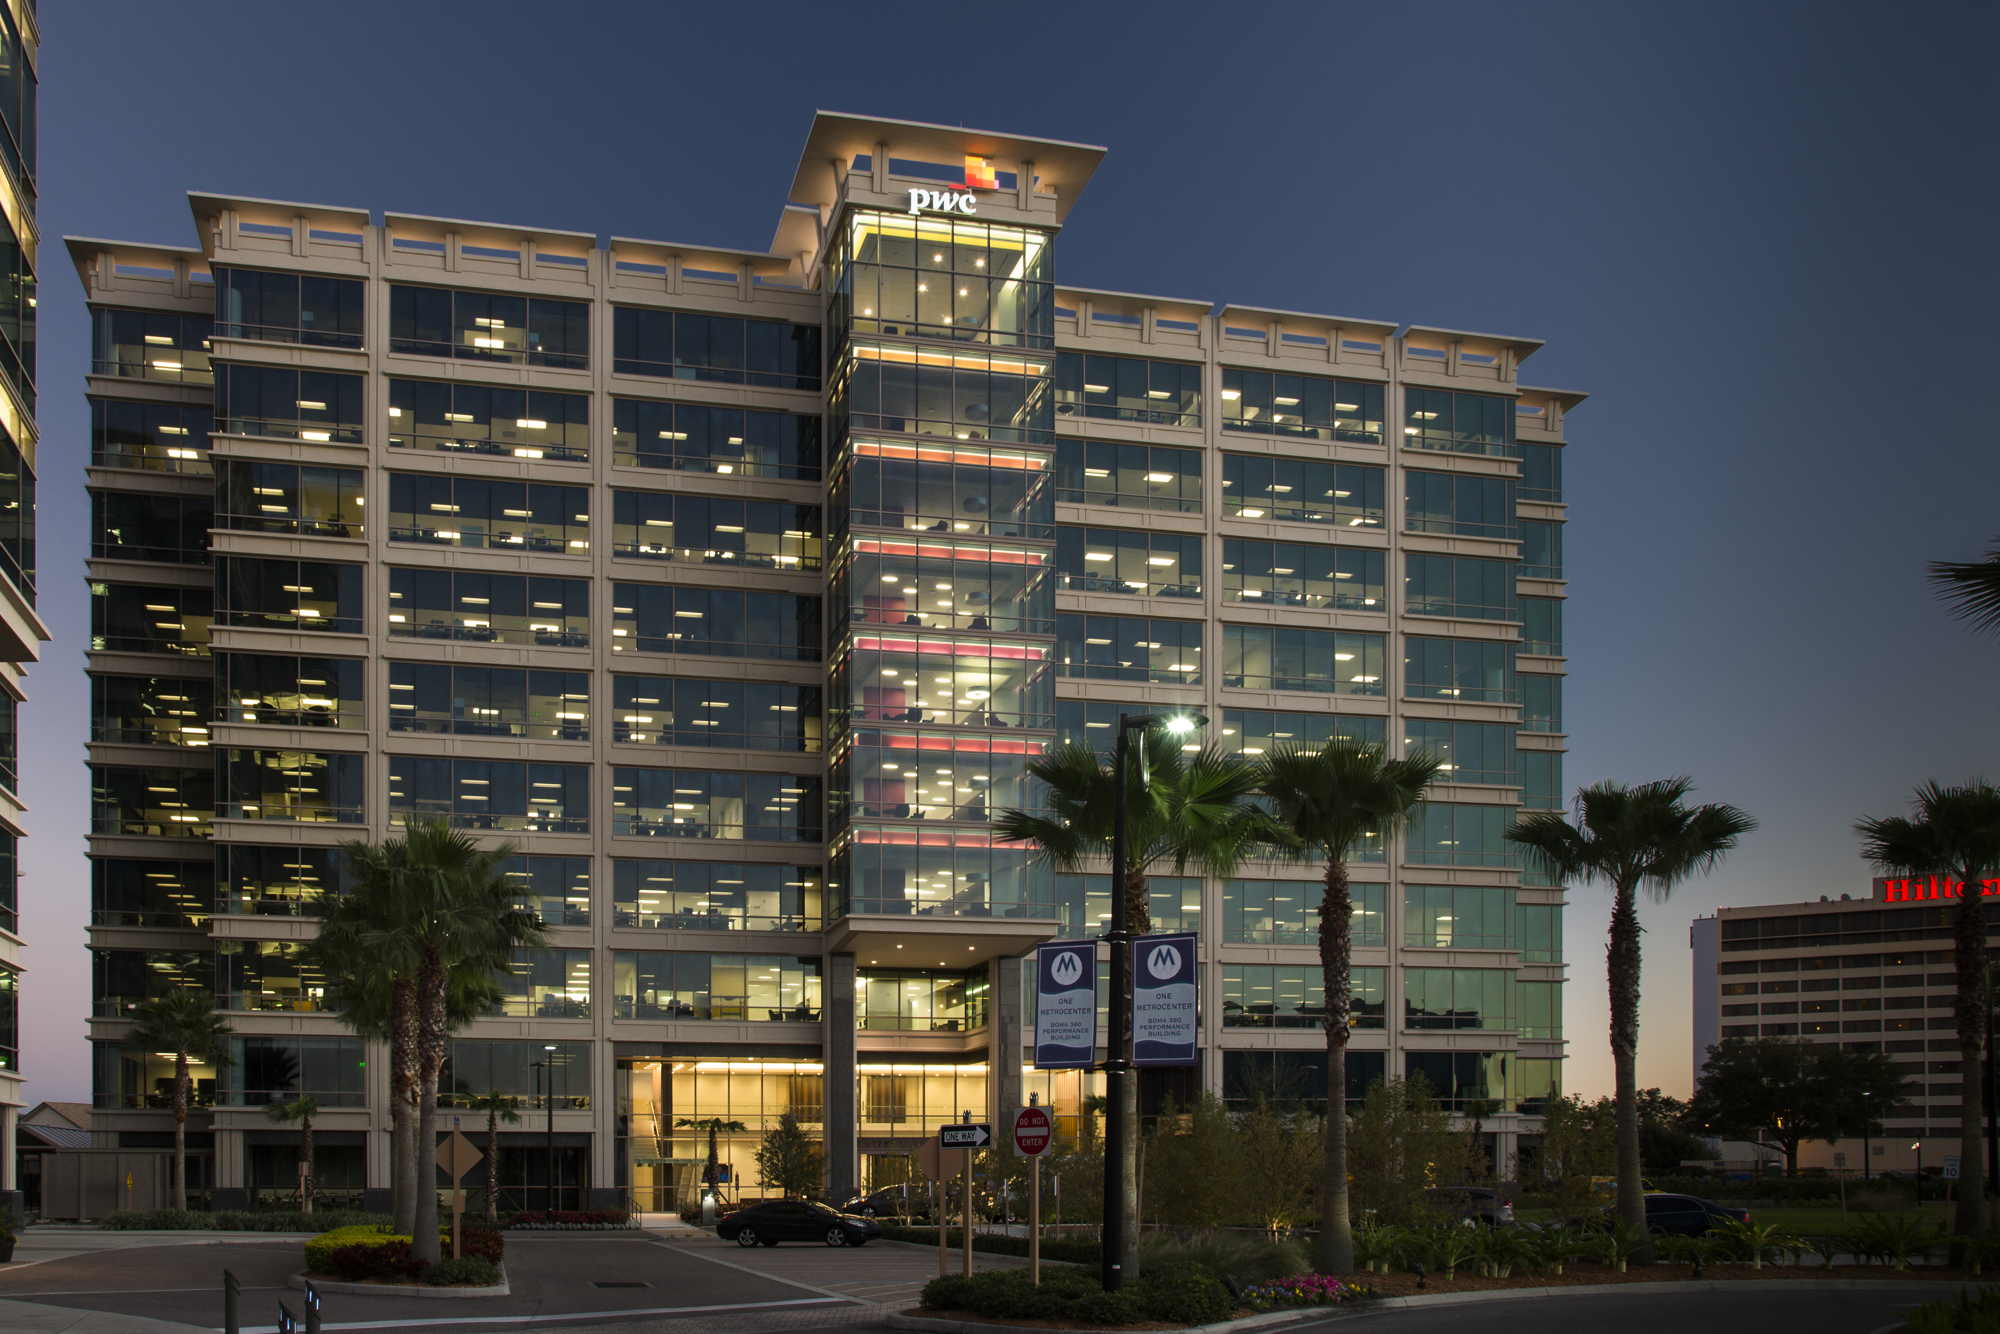 Stantec has done infrastructure work on the 32-acre MetWest International business park in Tampa's Westshore district